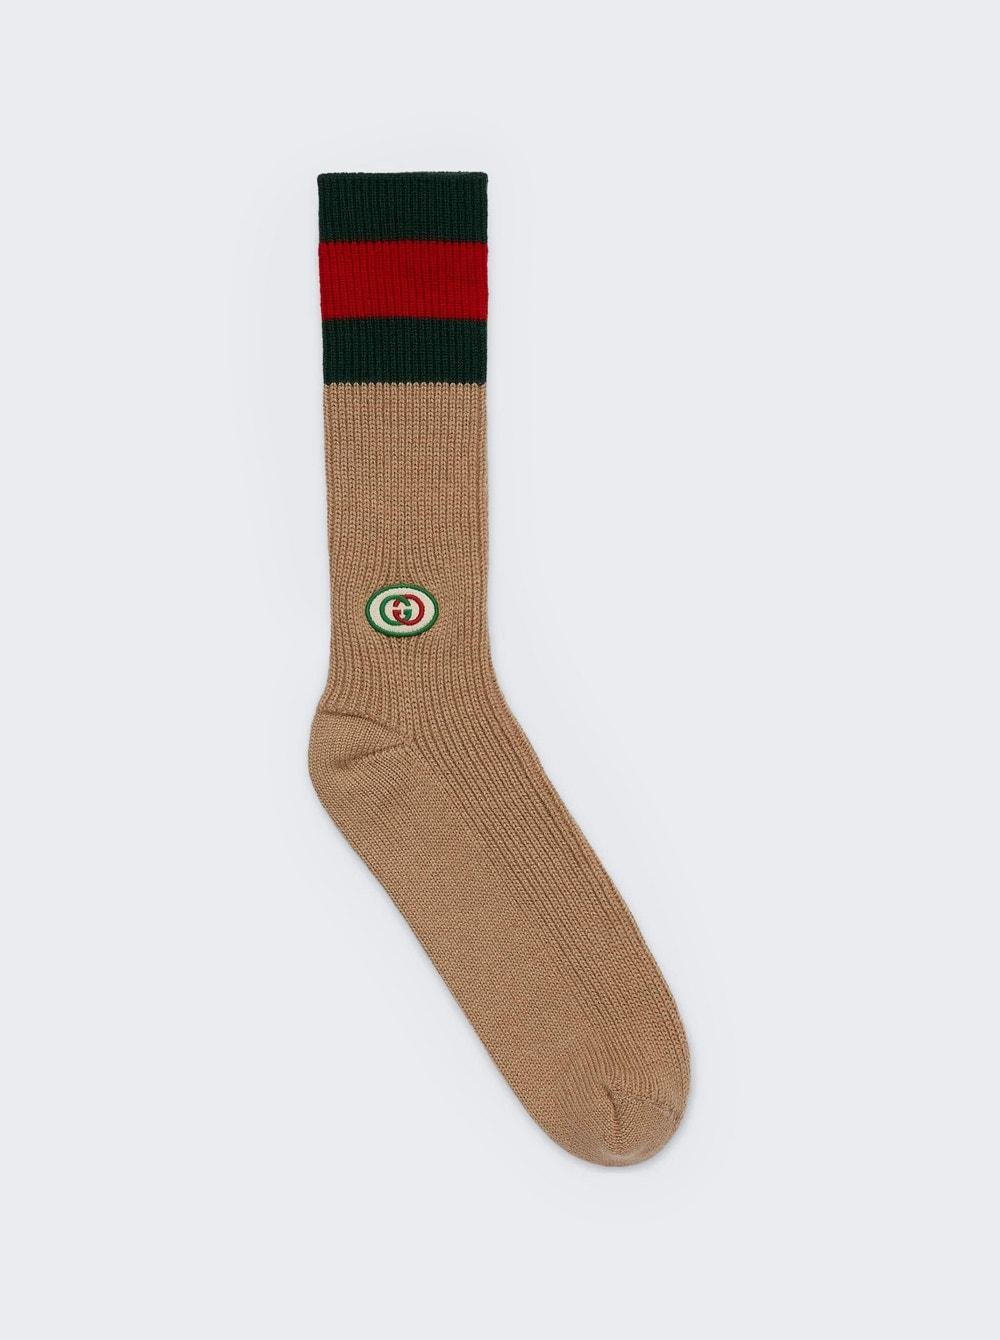 Classic Socks Camel And Dark Green by GUCCI